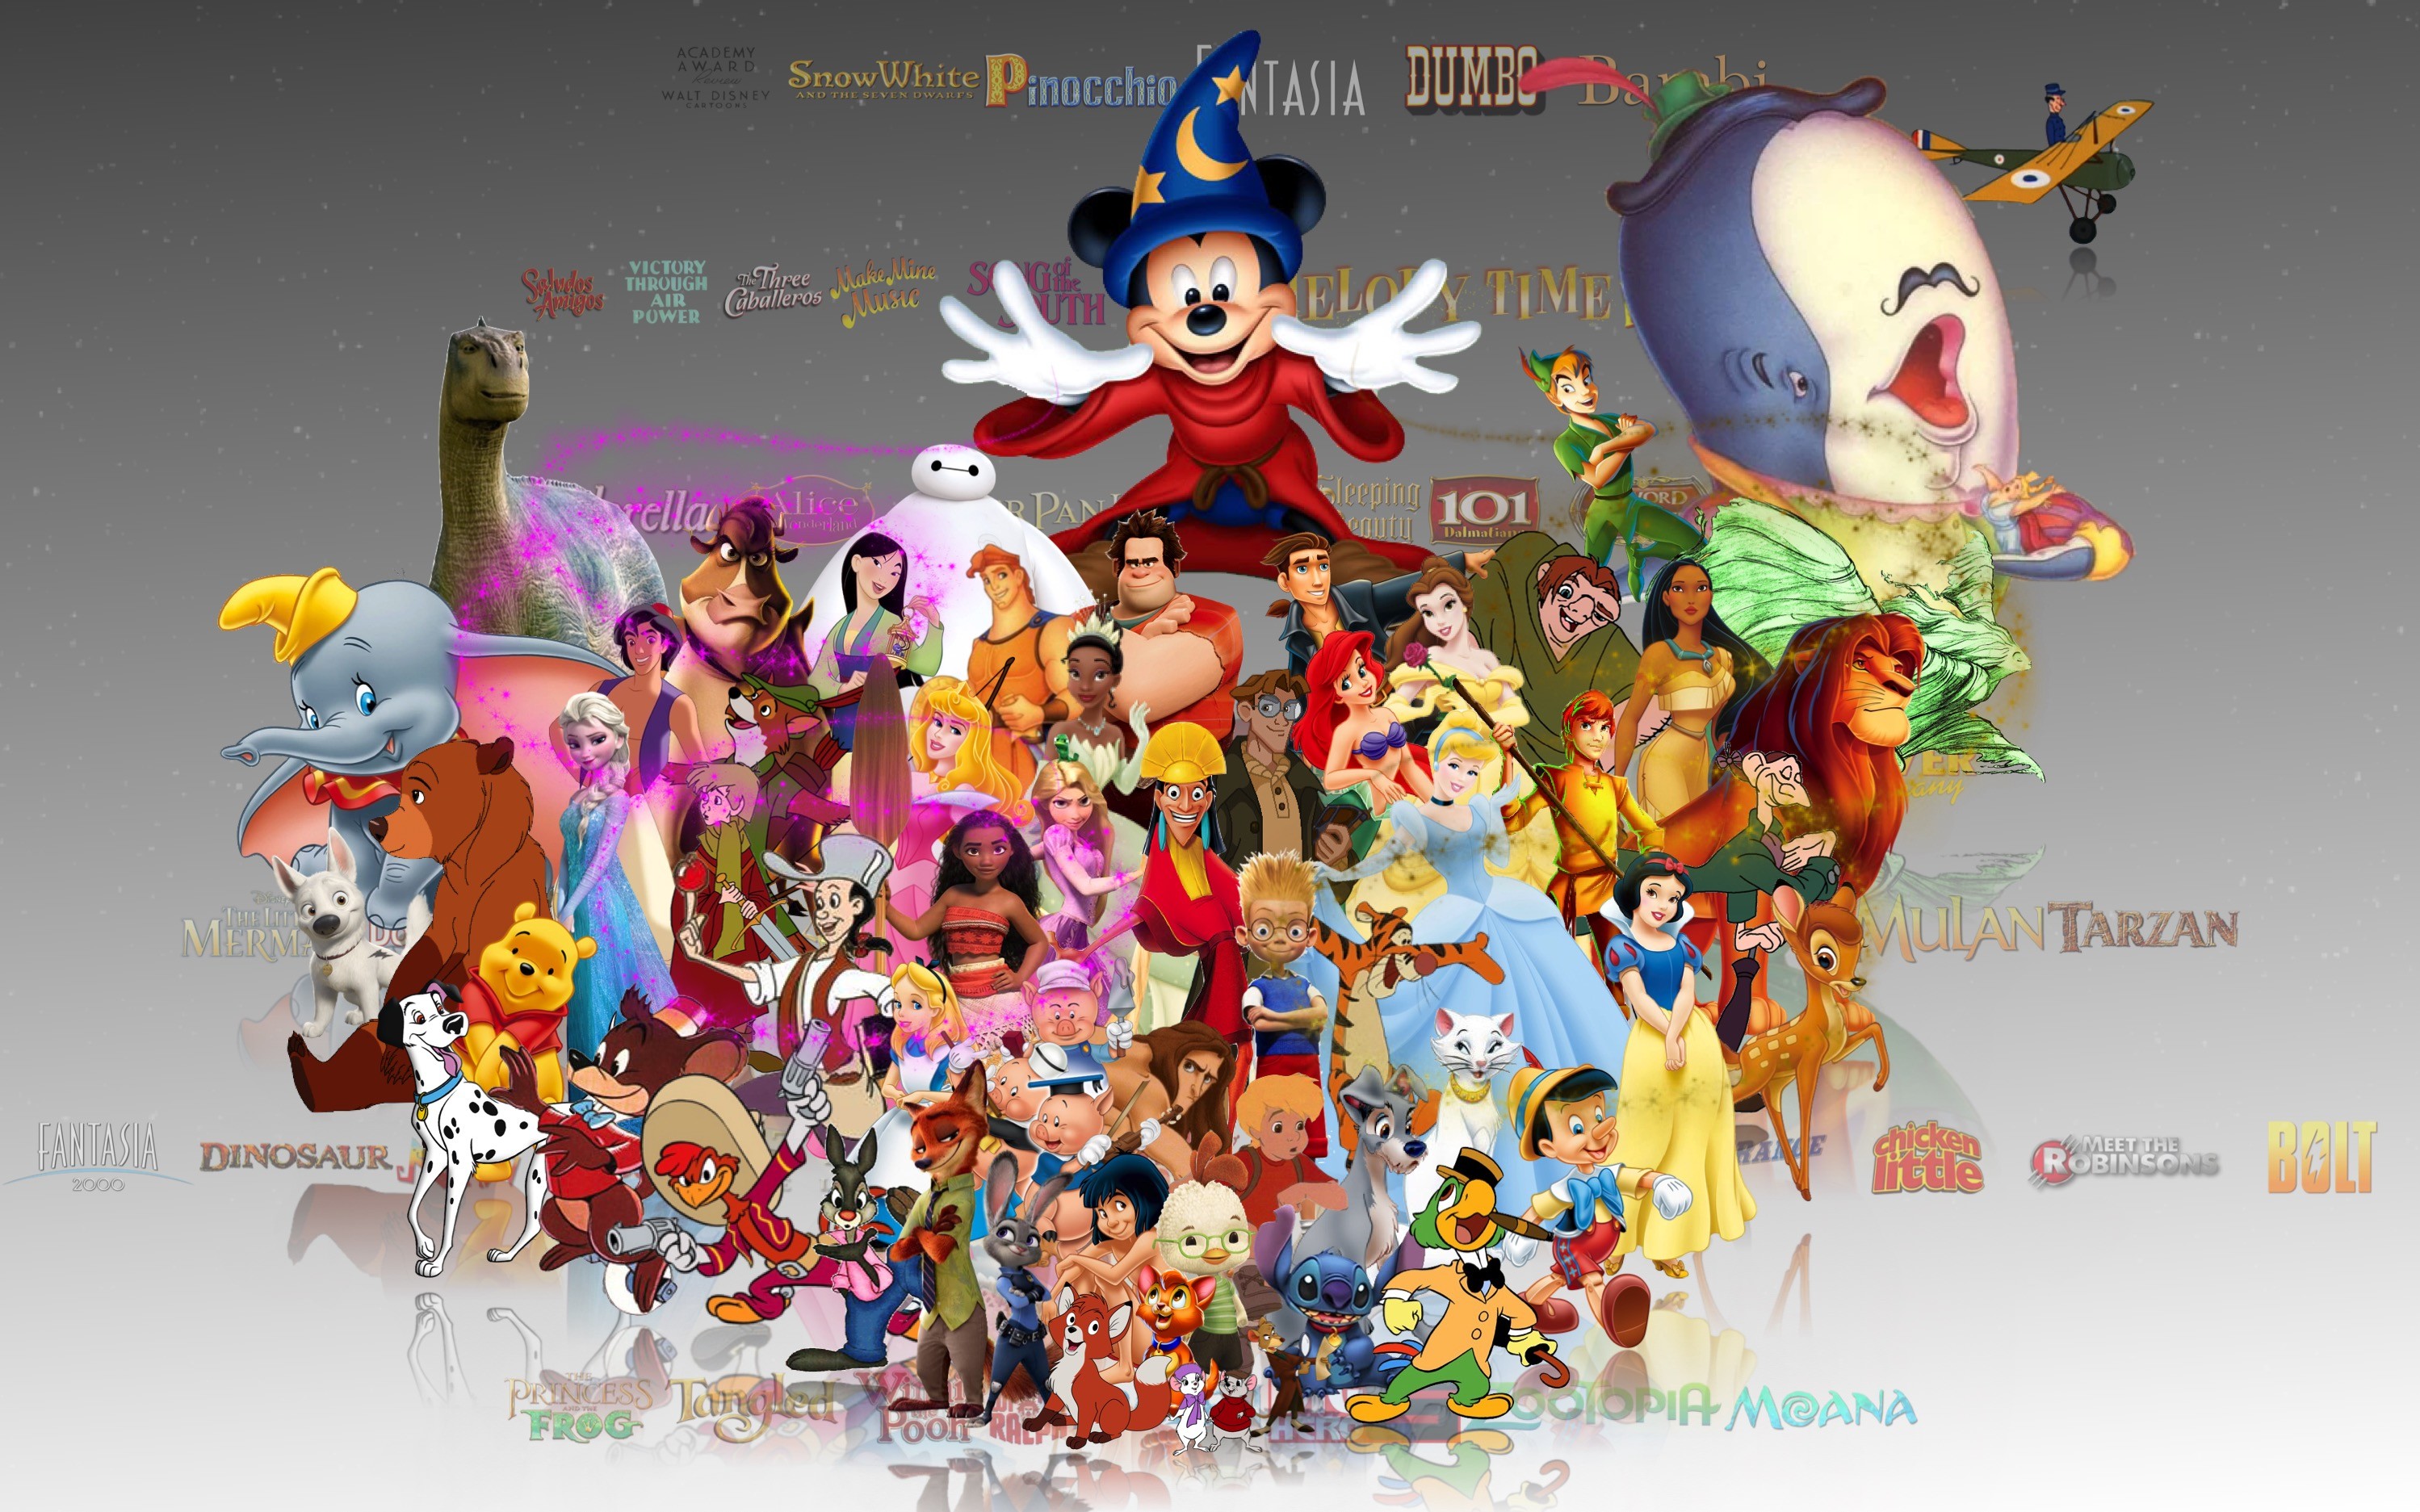 2997x1873 ... JSeedProductions Walt Disney Animation Studios character wallpaper by  JSeedProductions